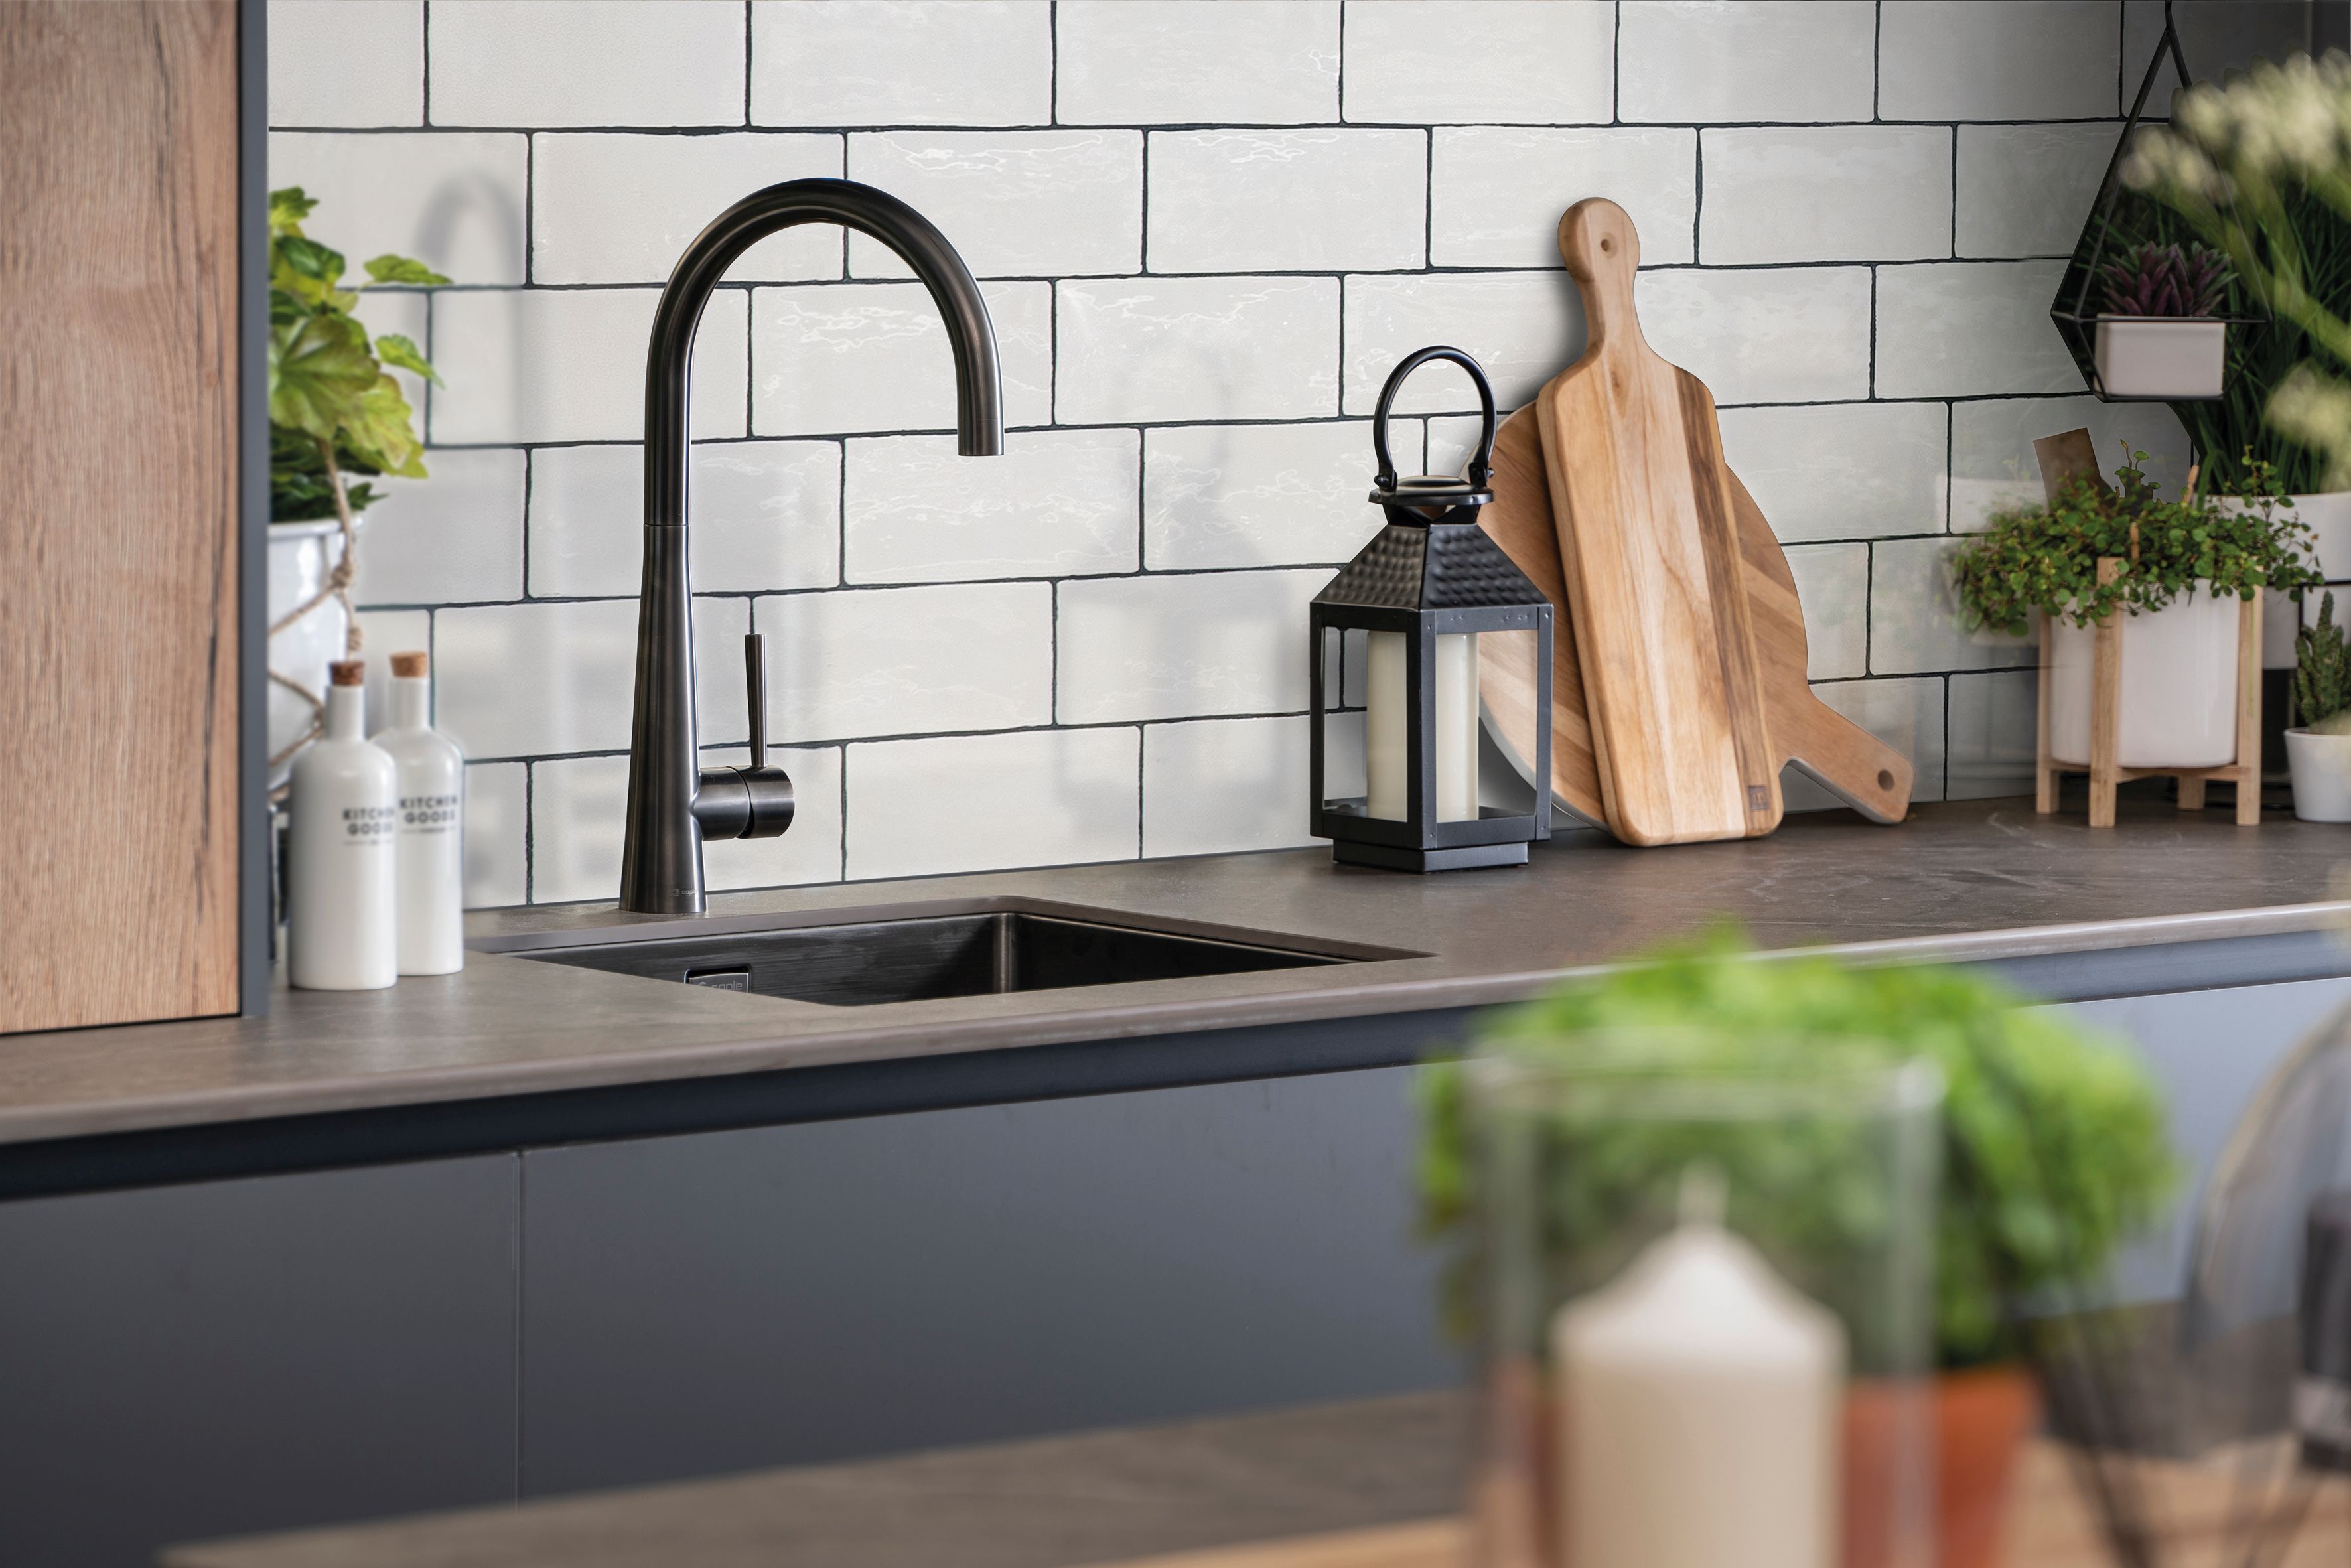 Caple’s Ridley tap comes in a stylish copper and gunmetal finish, from around £238 (shown here with a MODE0345 sink), and features a popular, elegant swan neck, single lever design (Caple/PA)